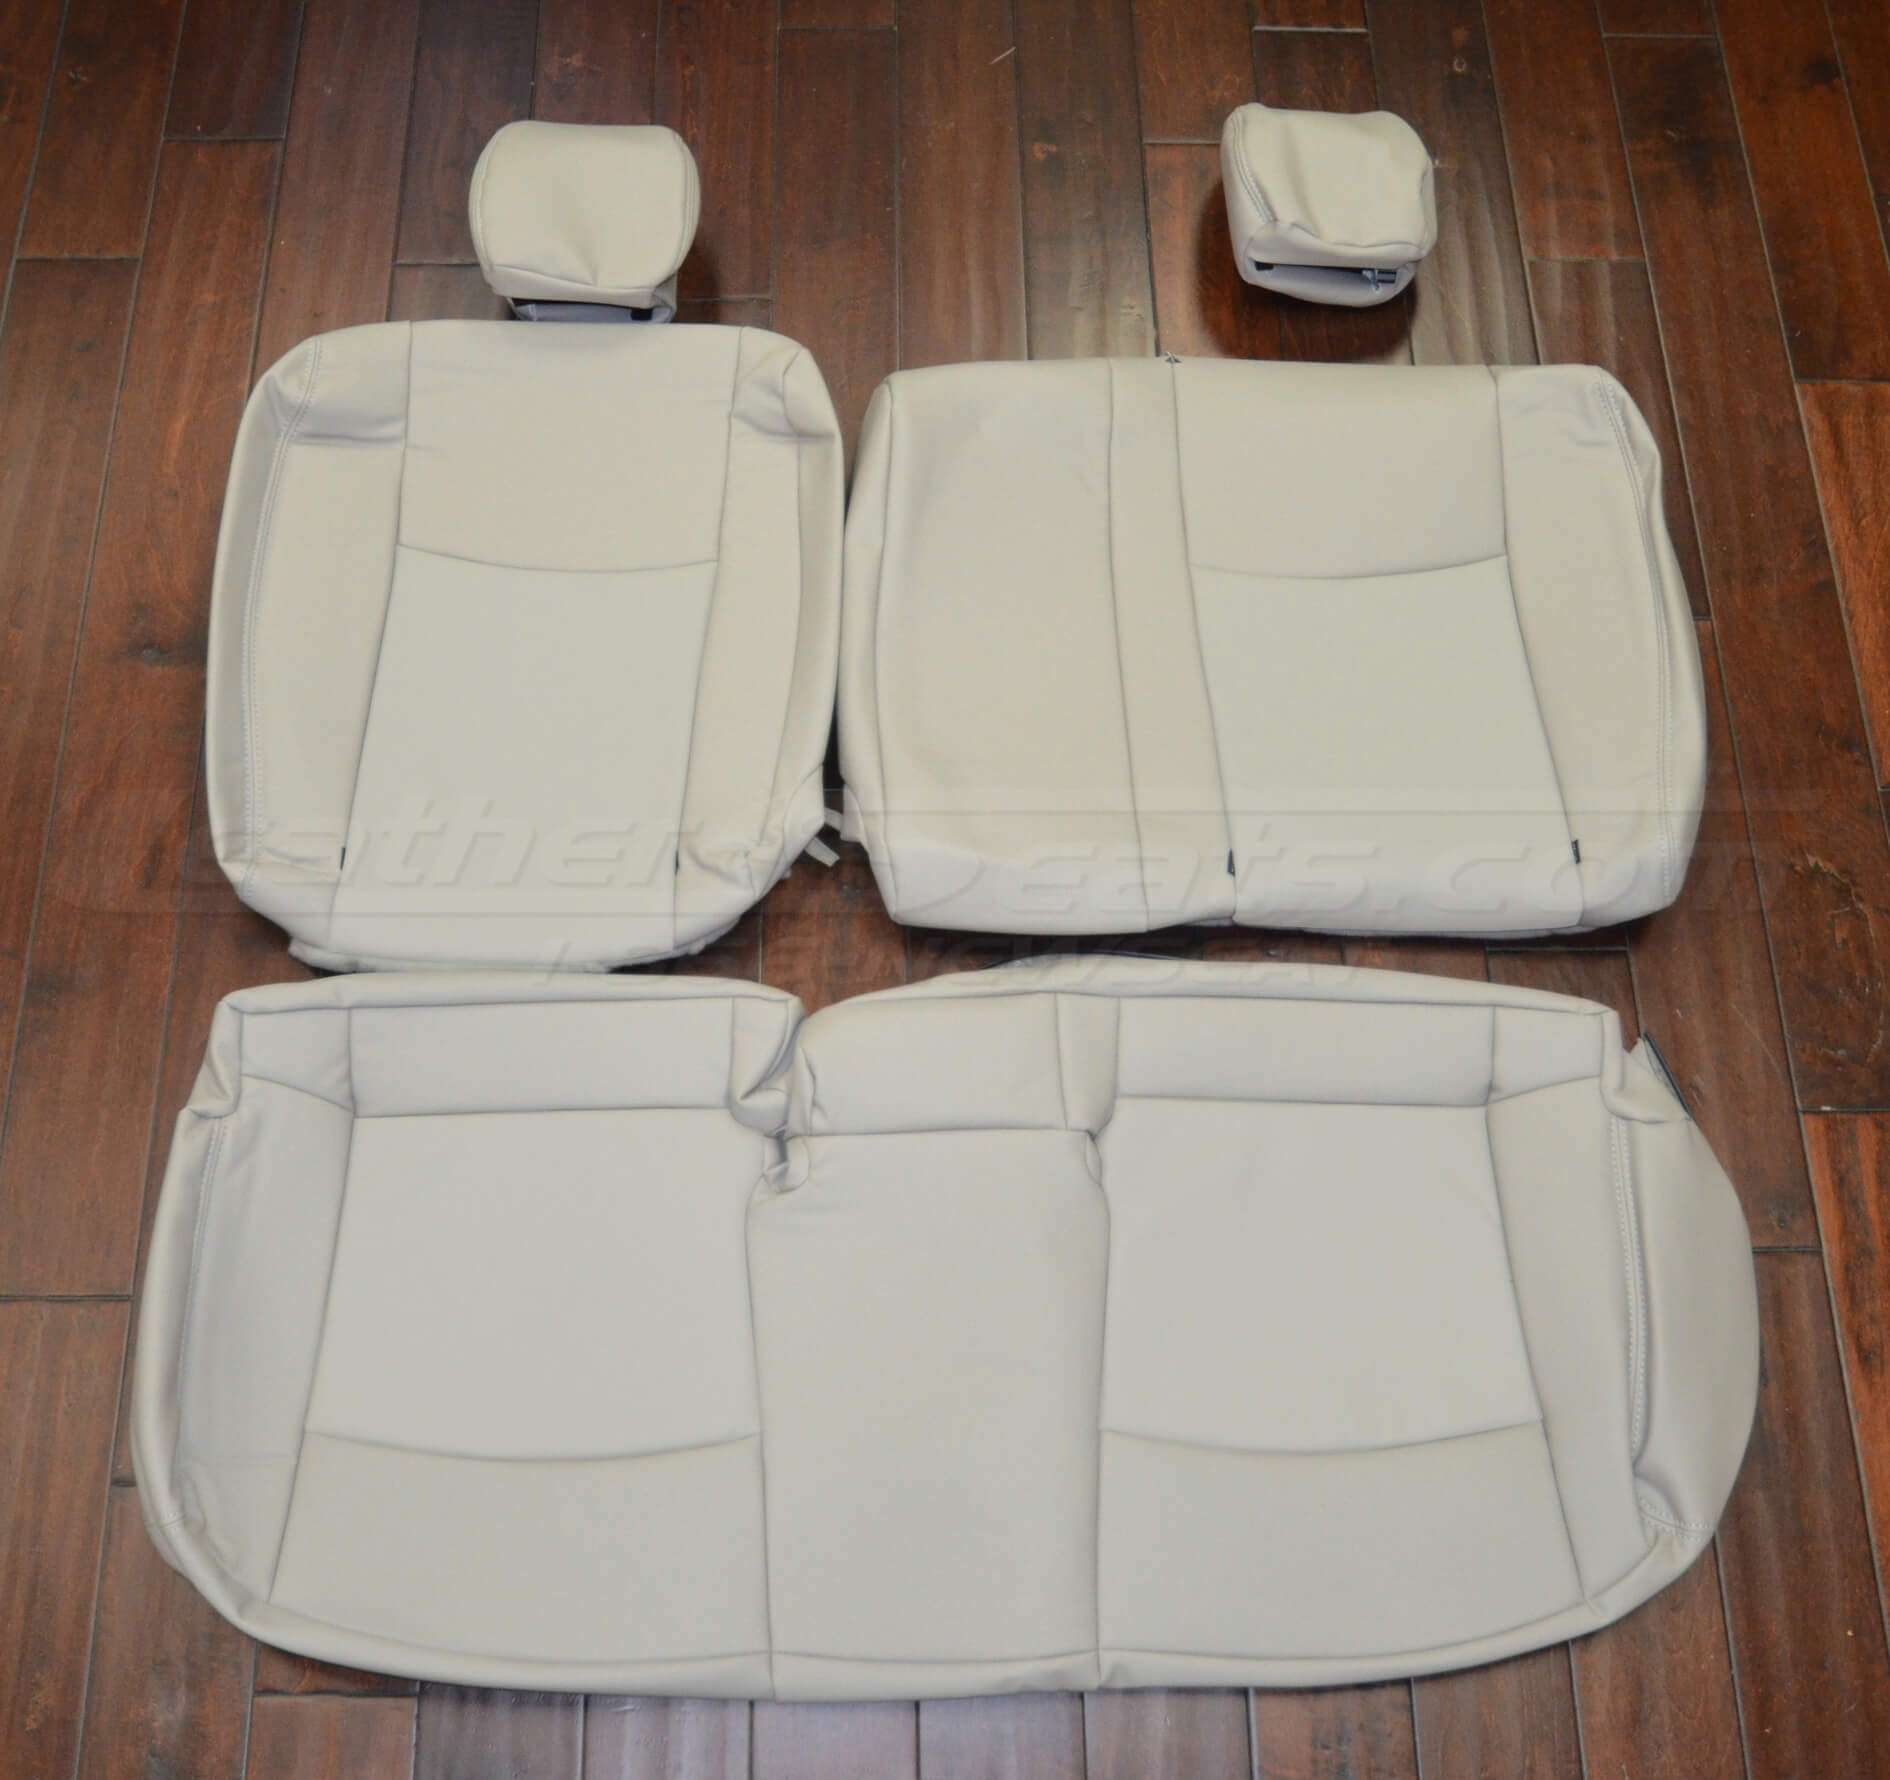 2011-2011 Nissan Leaf Leather Seats - Dove Grey - Rear seat upholstery